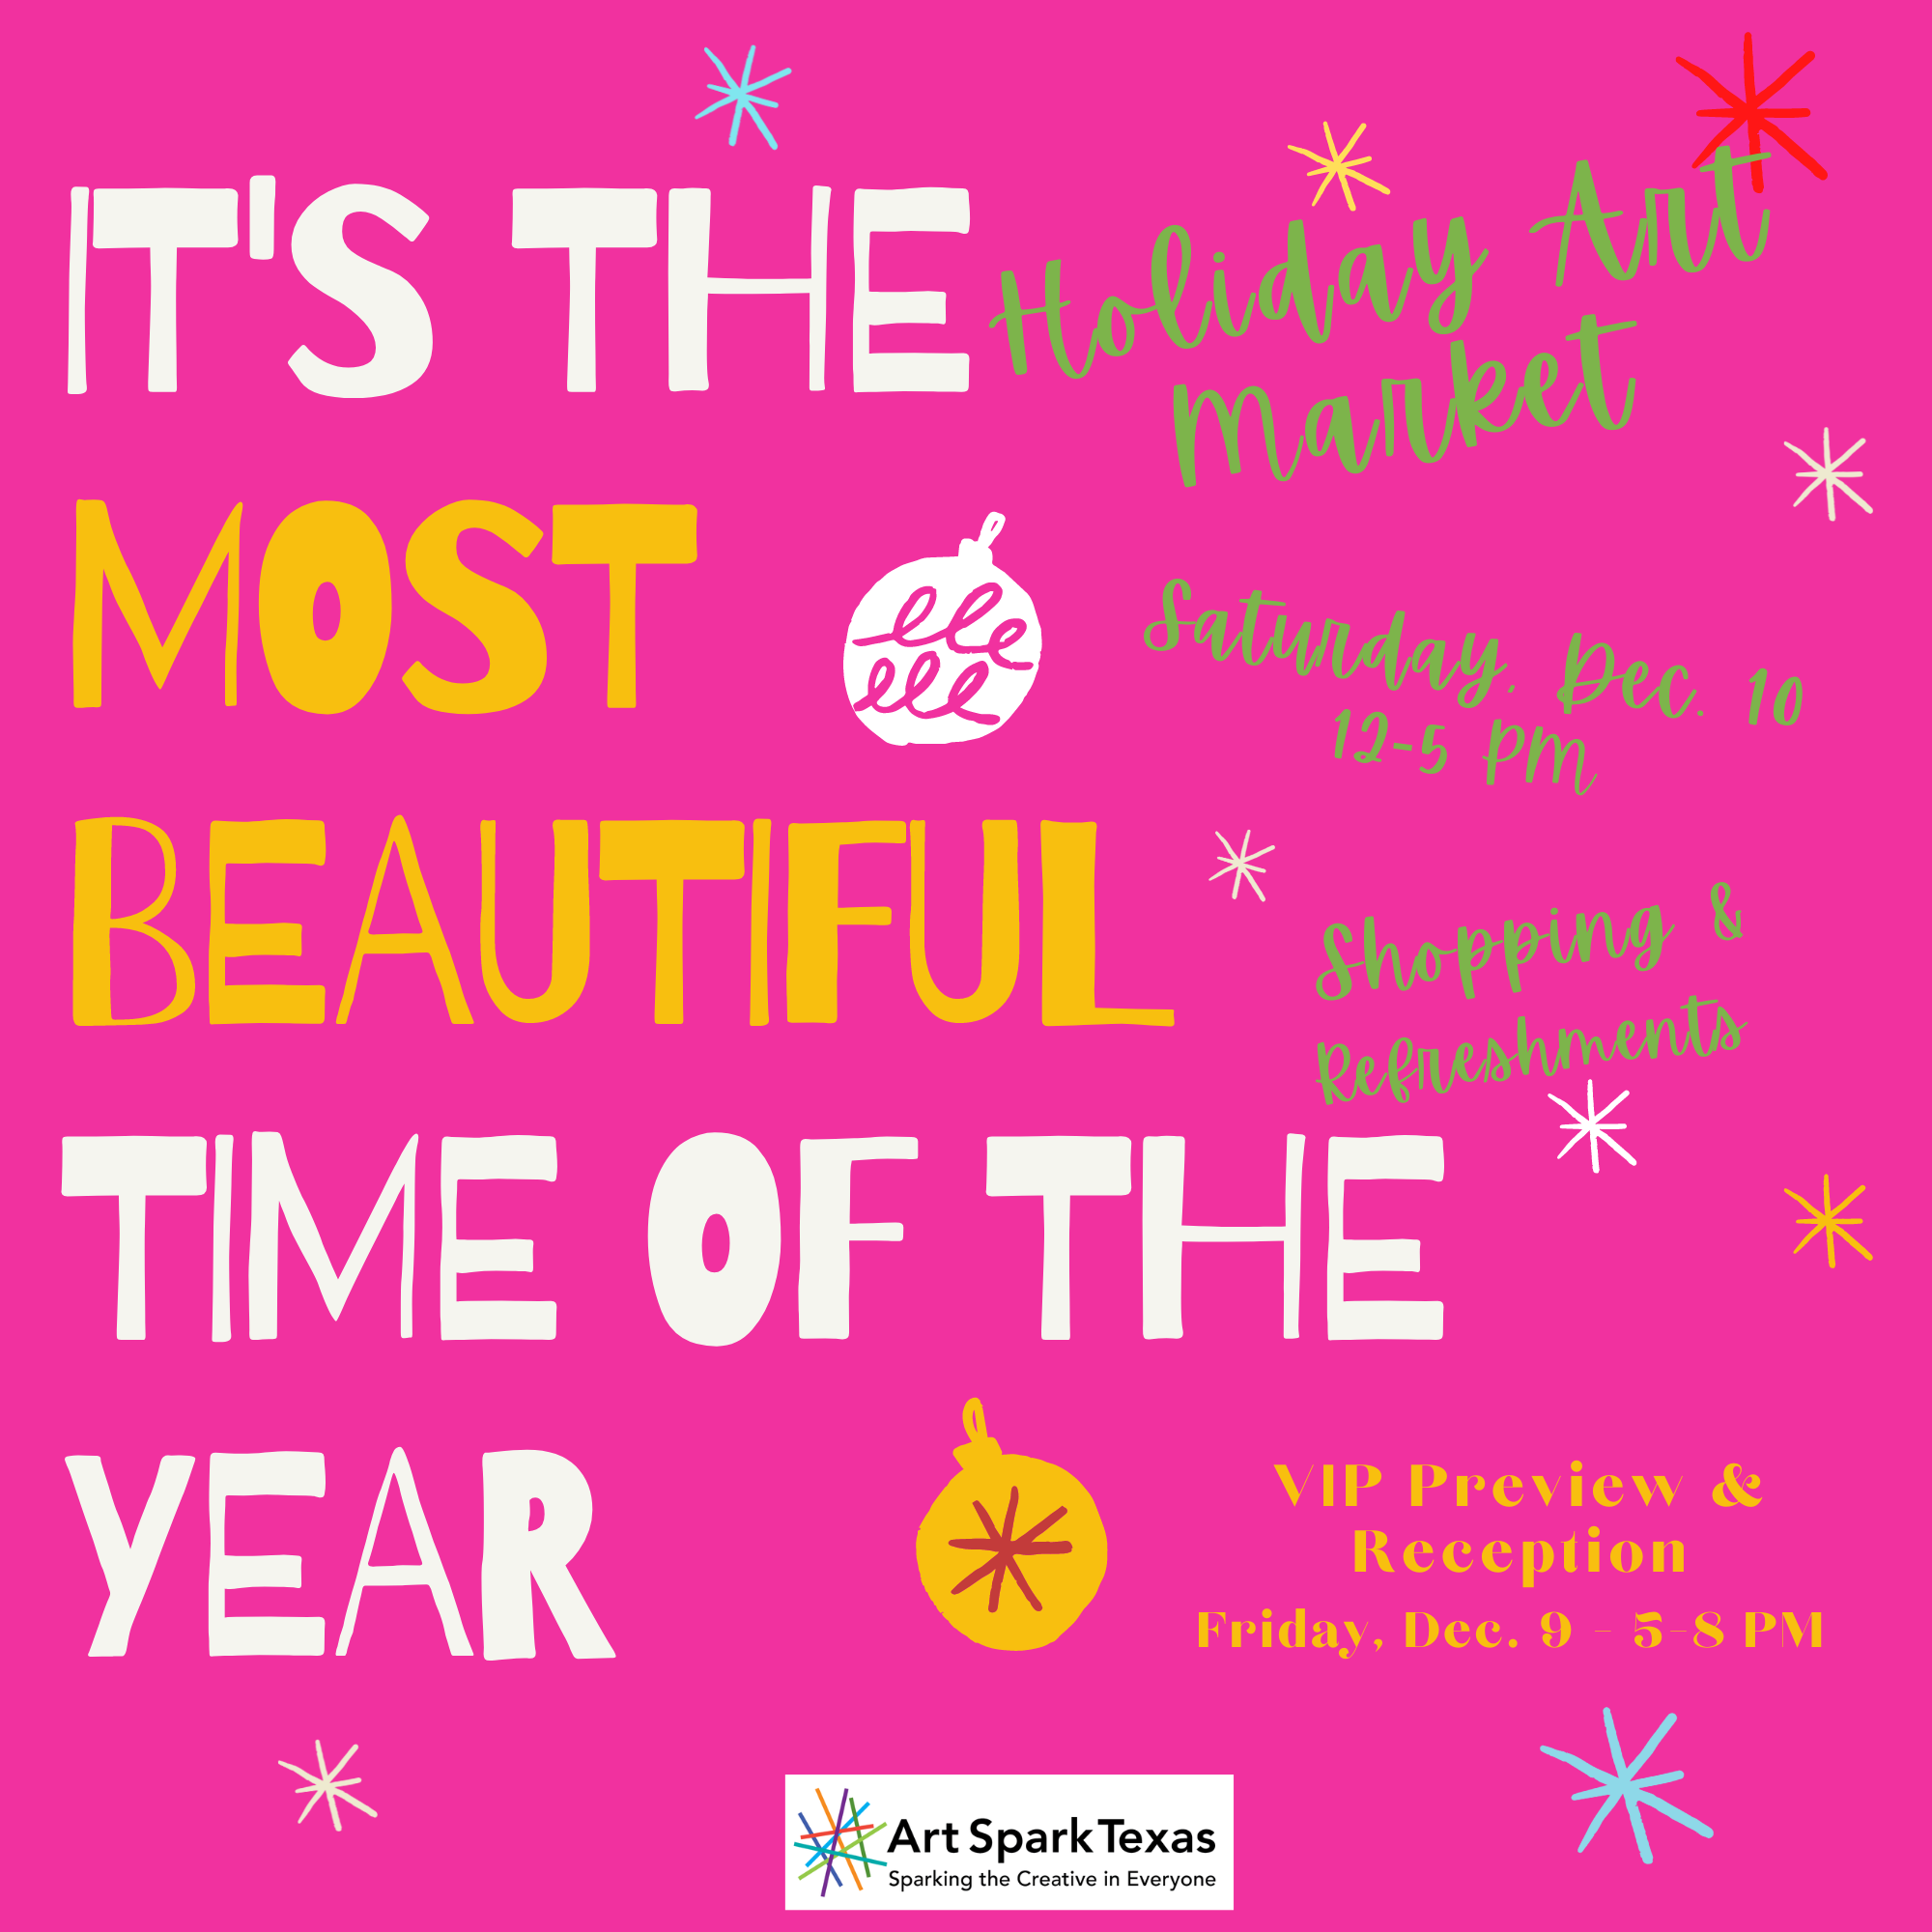 snowflakes and ornaments with text. Text reads, "It's the most beautiful time of the year."